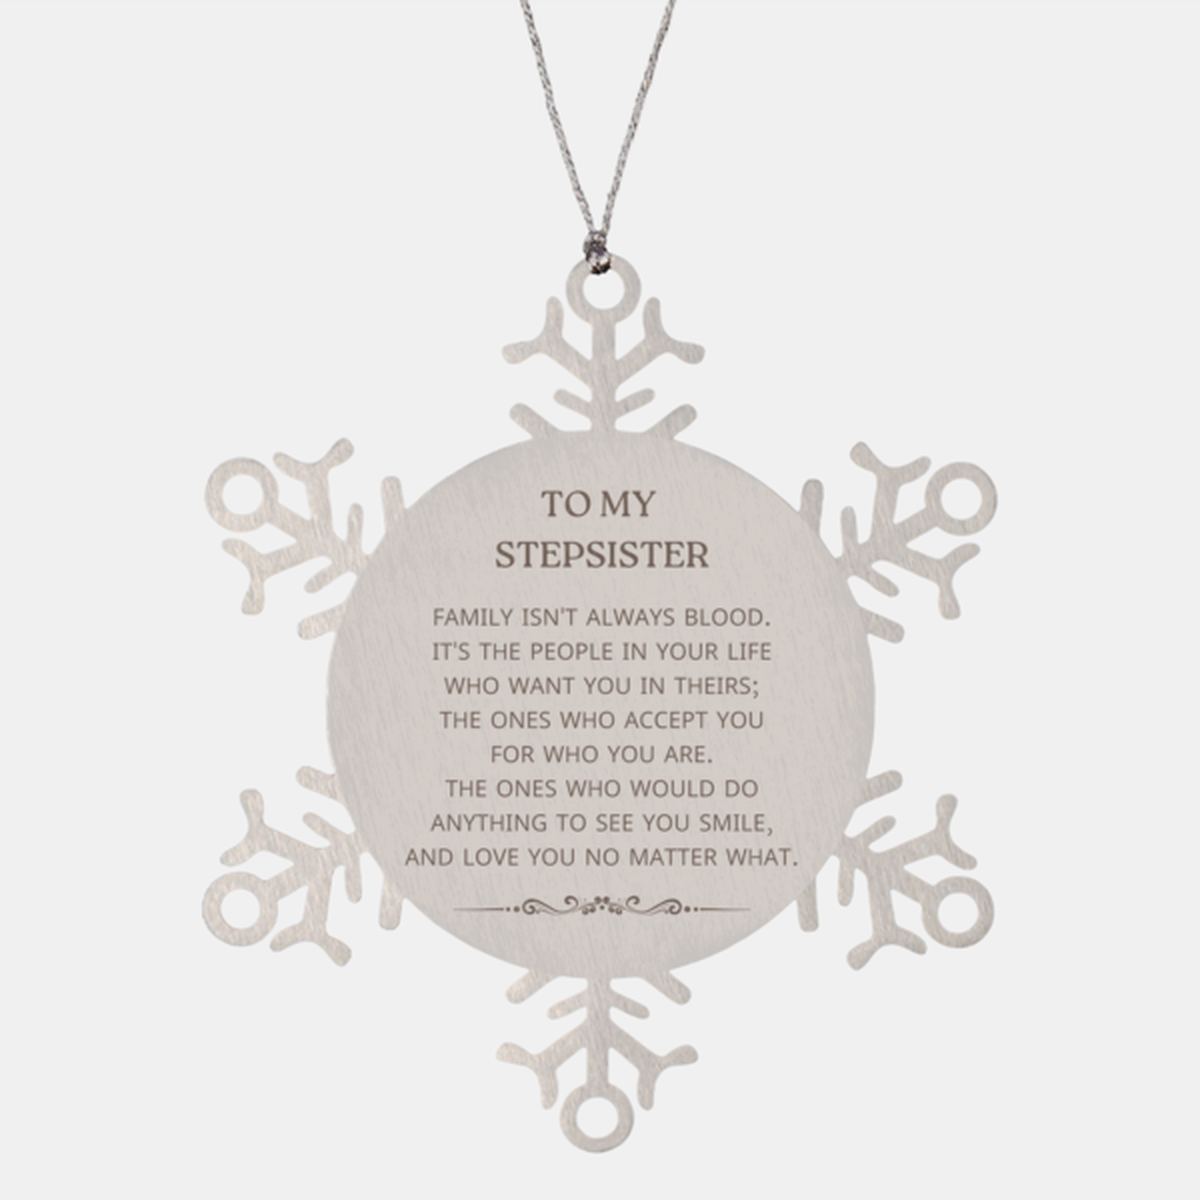 To My Stepsister Gifts, Family isn't always blood, Stepsister Snowflake Ornament, Birthday Christmas Unique Present For Stepsister